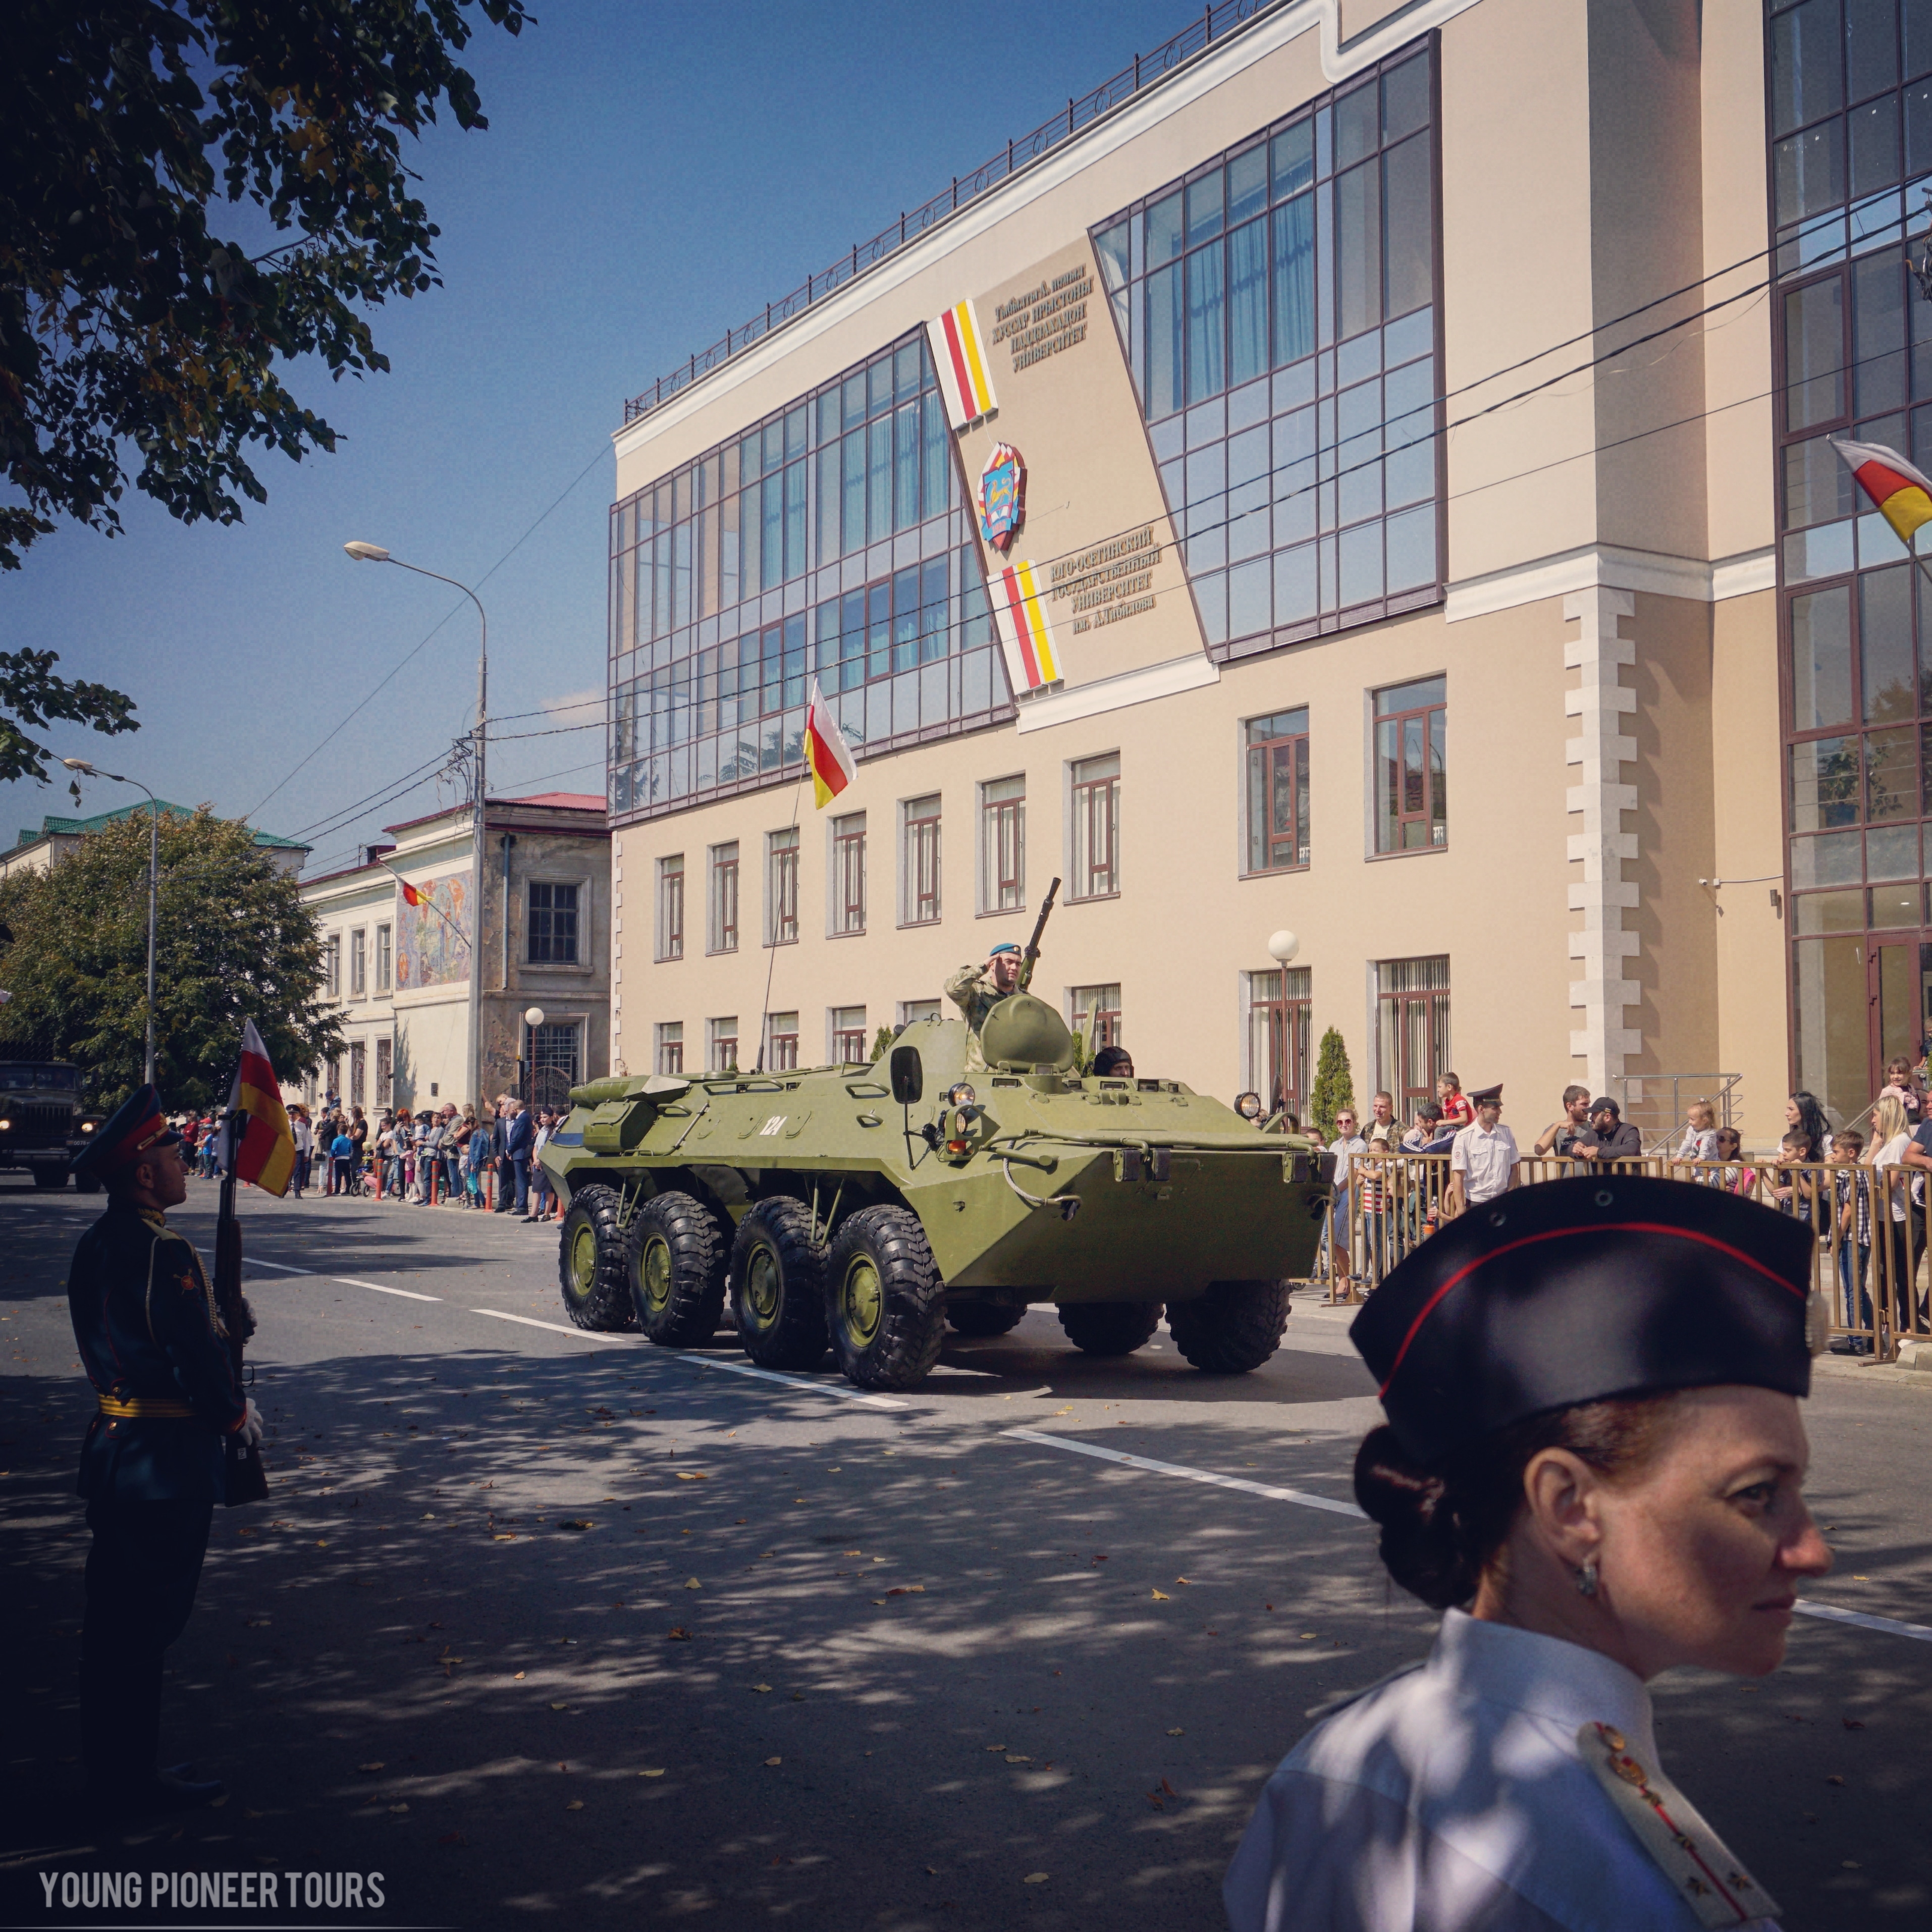 tanks in South Ossetia parade